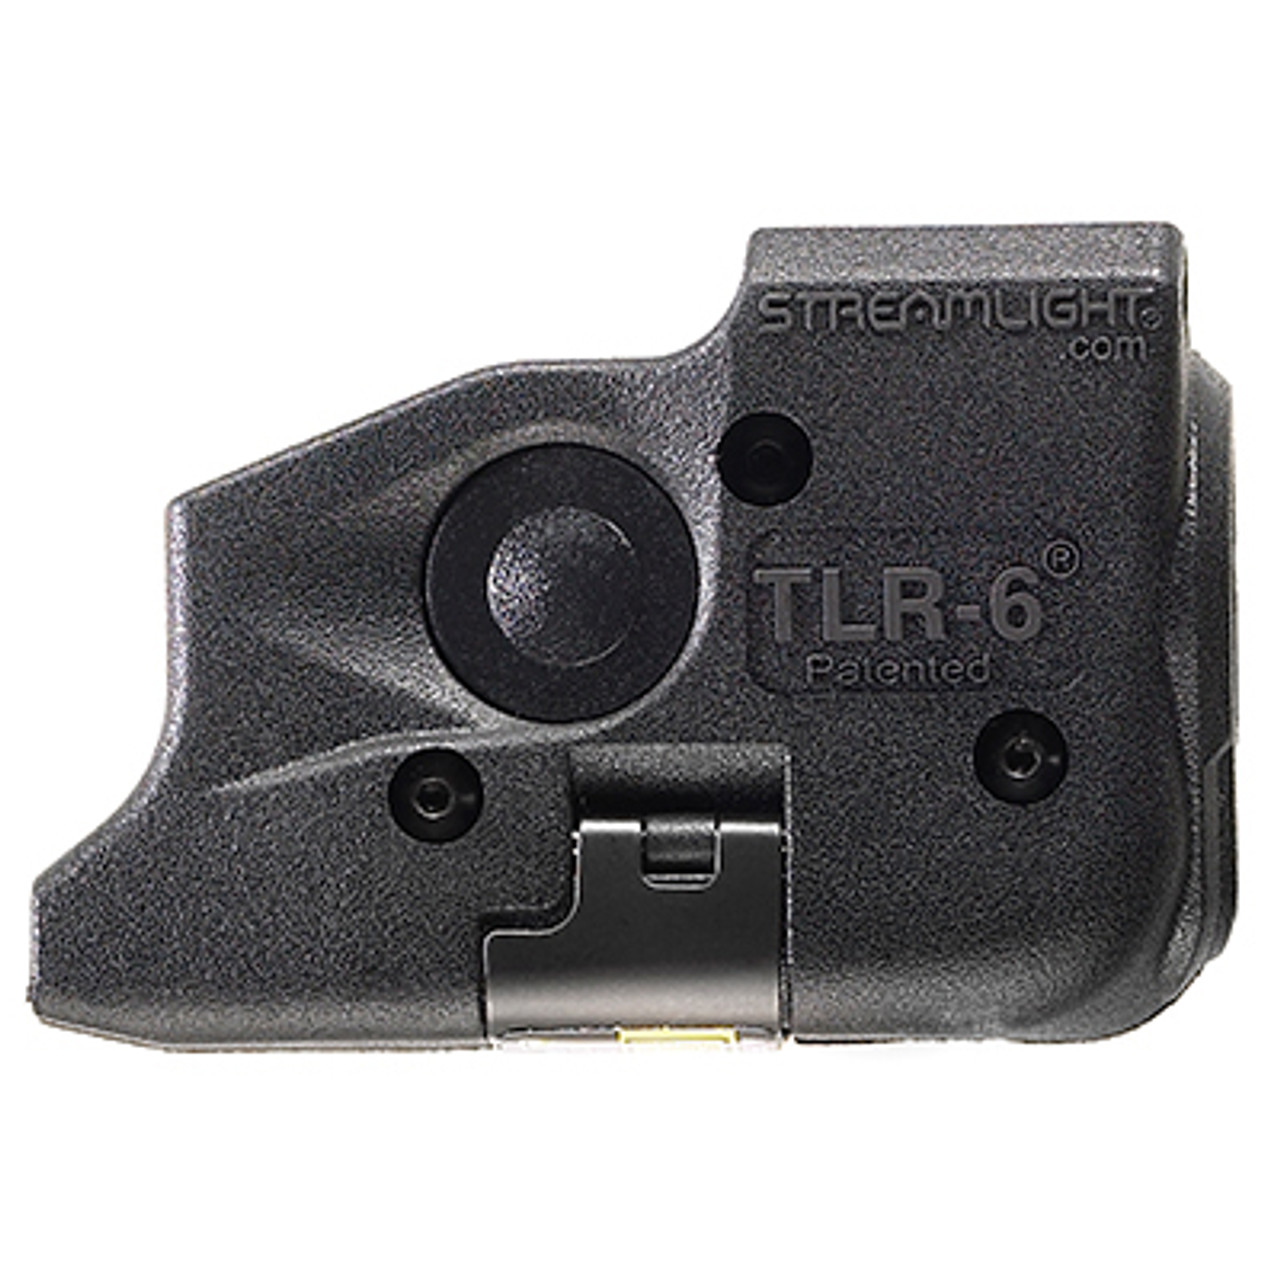 Streamlight 69285 TLR-6 WITHOUT LASER (SIG SAUER 365) - Includes two CR 1/3N lithium batteries - DSS